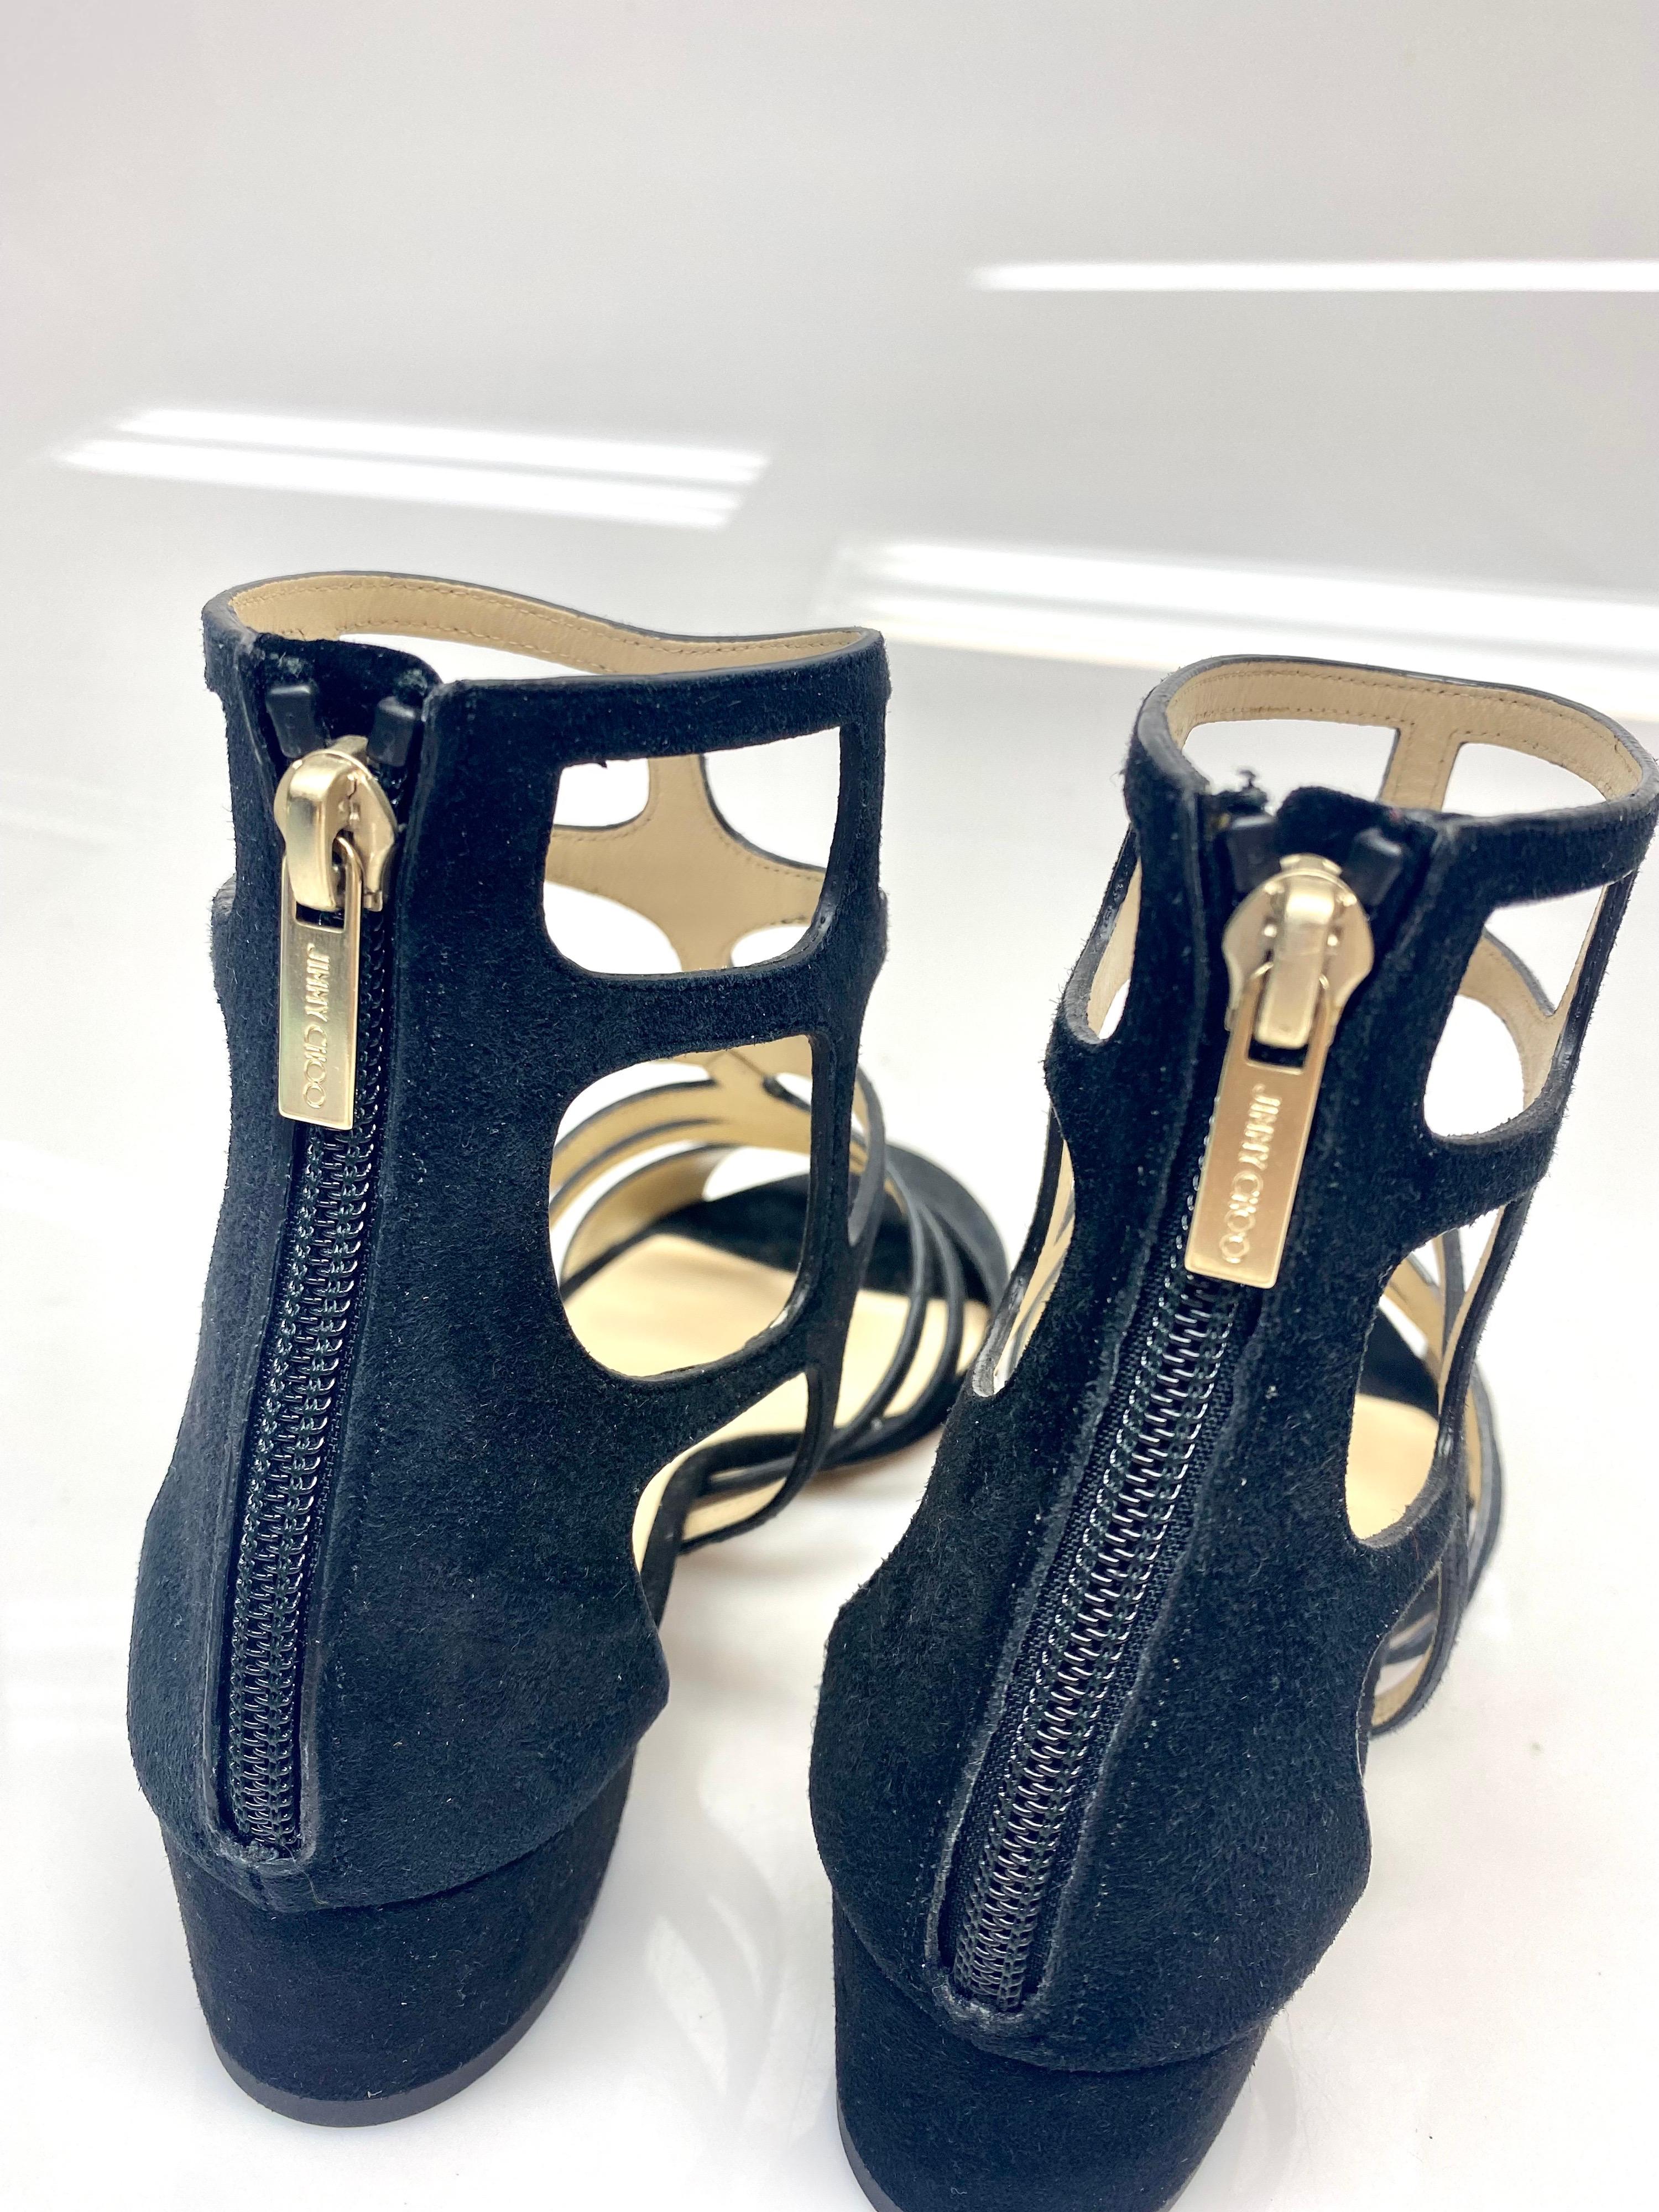 Jimmy Choo Black Suede Gladiator Sandals - Size 36.5 In Excellent Condition For Sale In West Palm Beach, FL